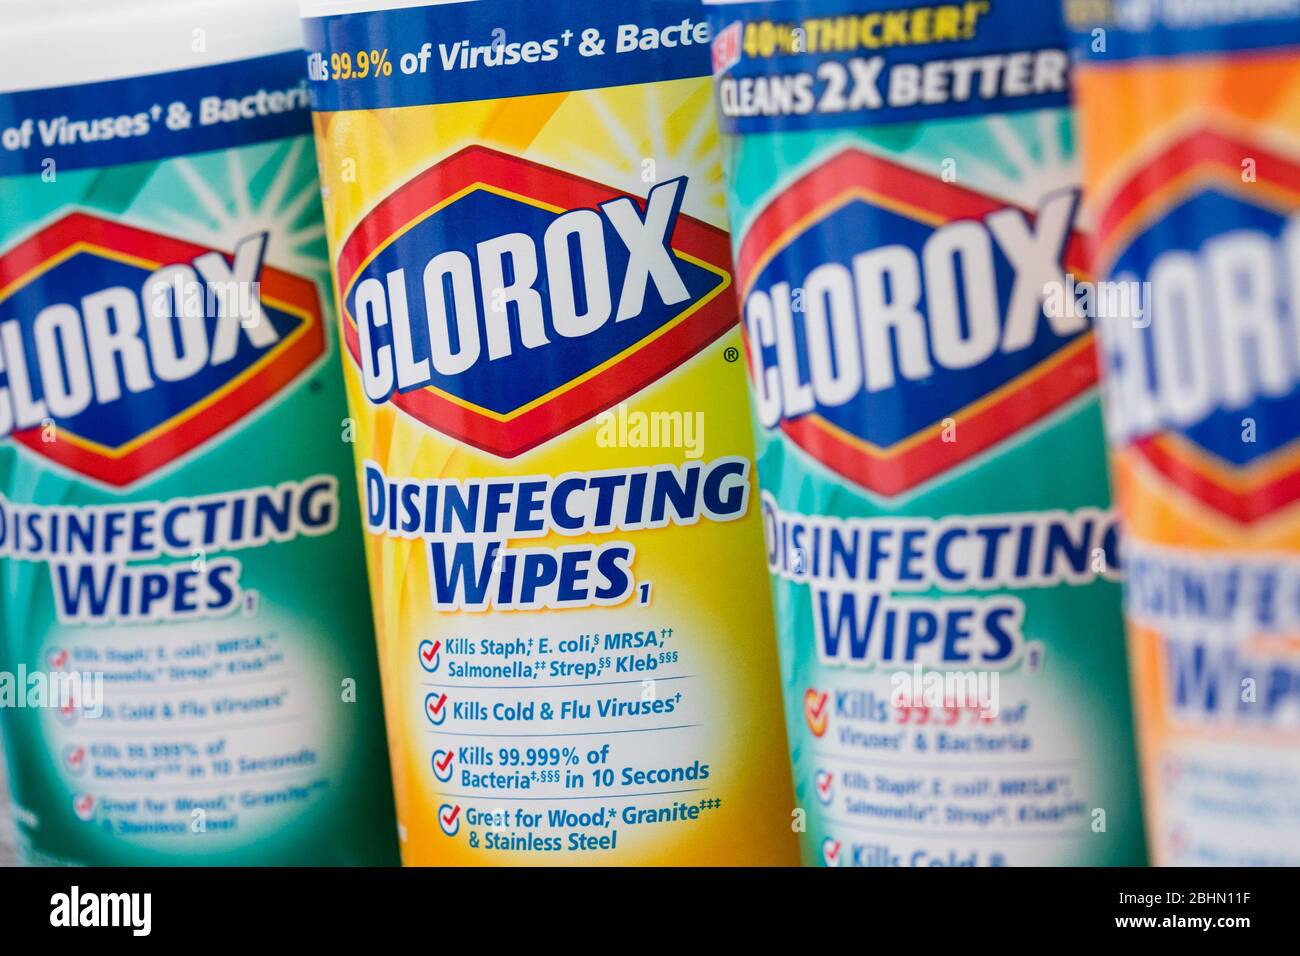 A grouping of Clorox disinfectant products arranged for a photograph. Stock Photo